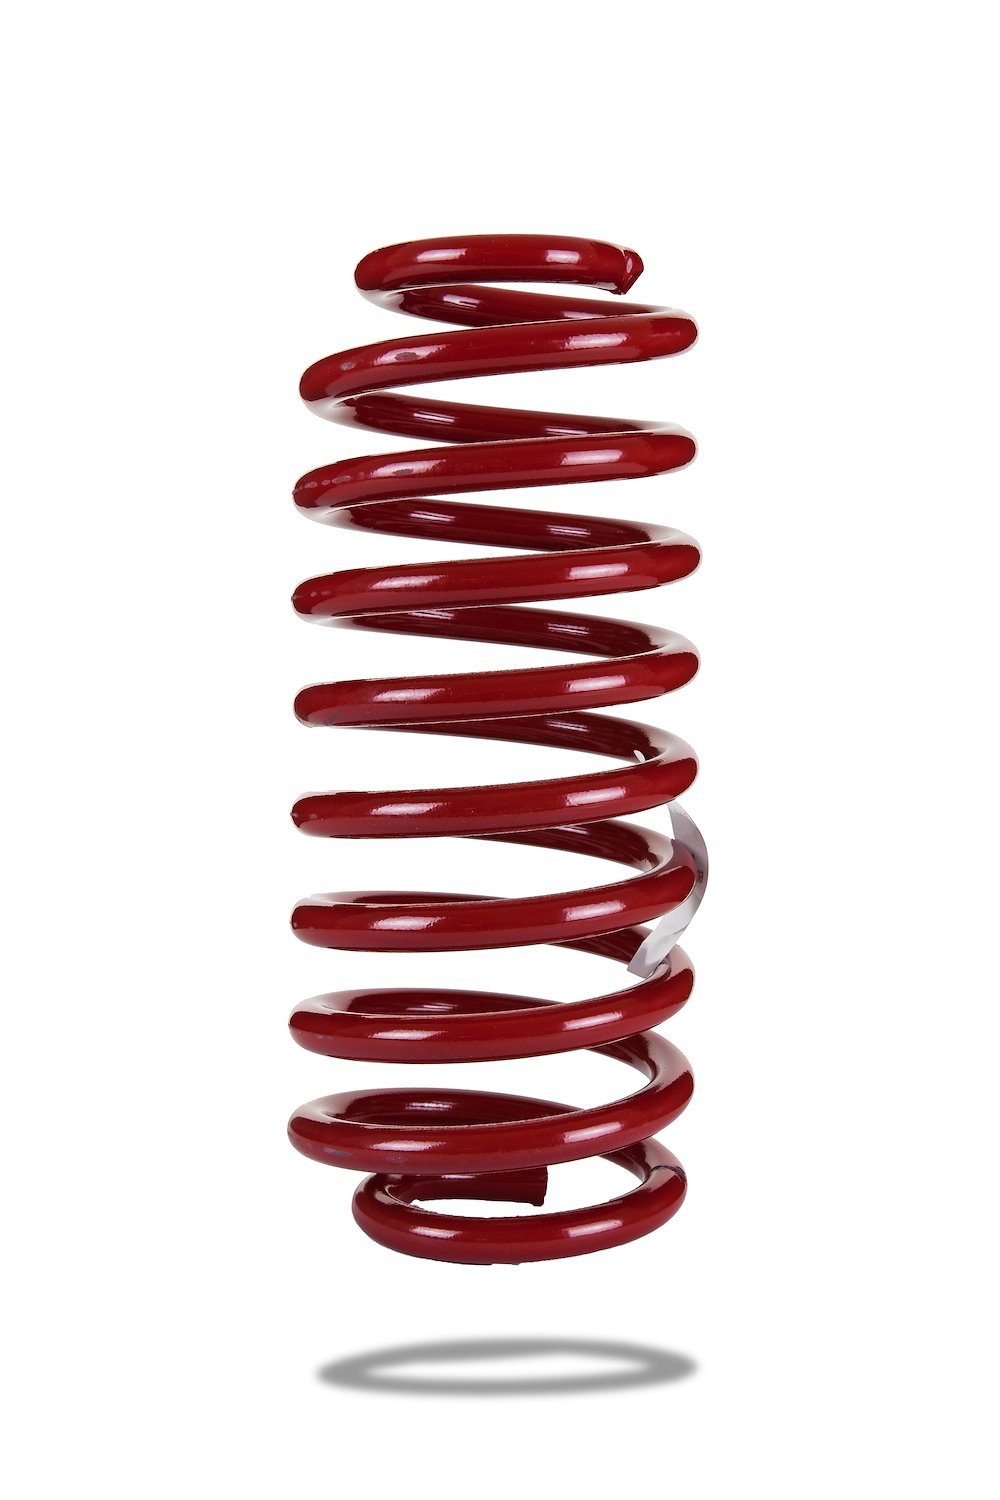 PED-220009 Coil Spring, Rear, Ford Mustang S197, Low